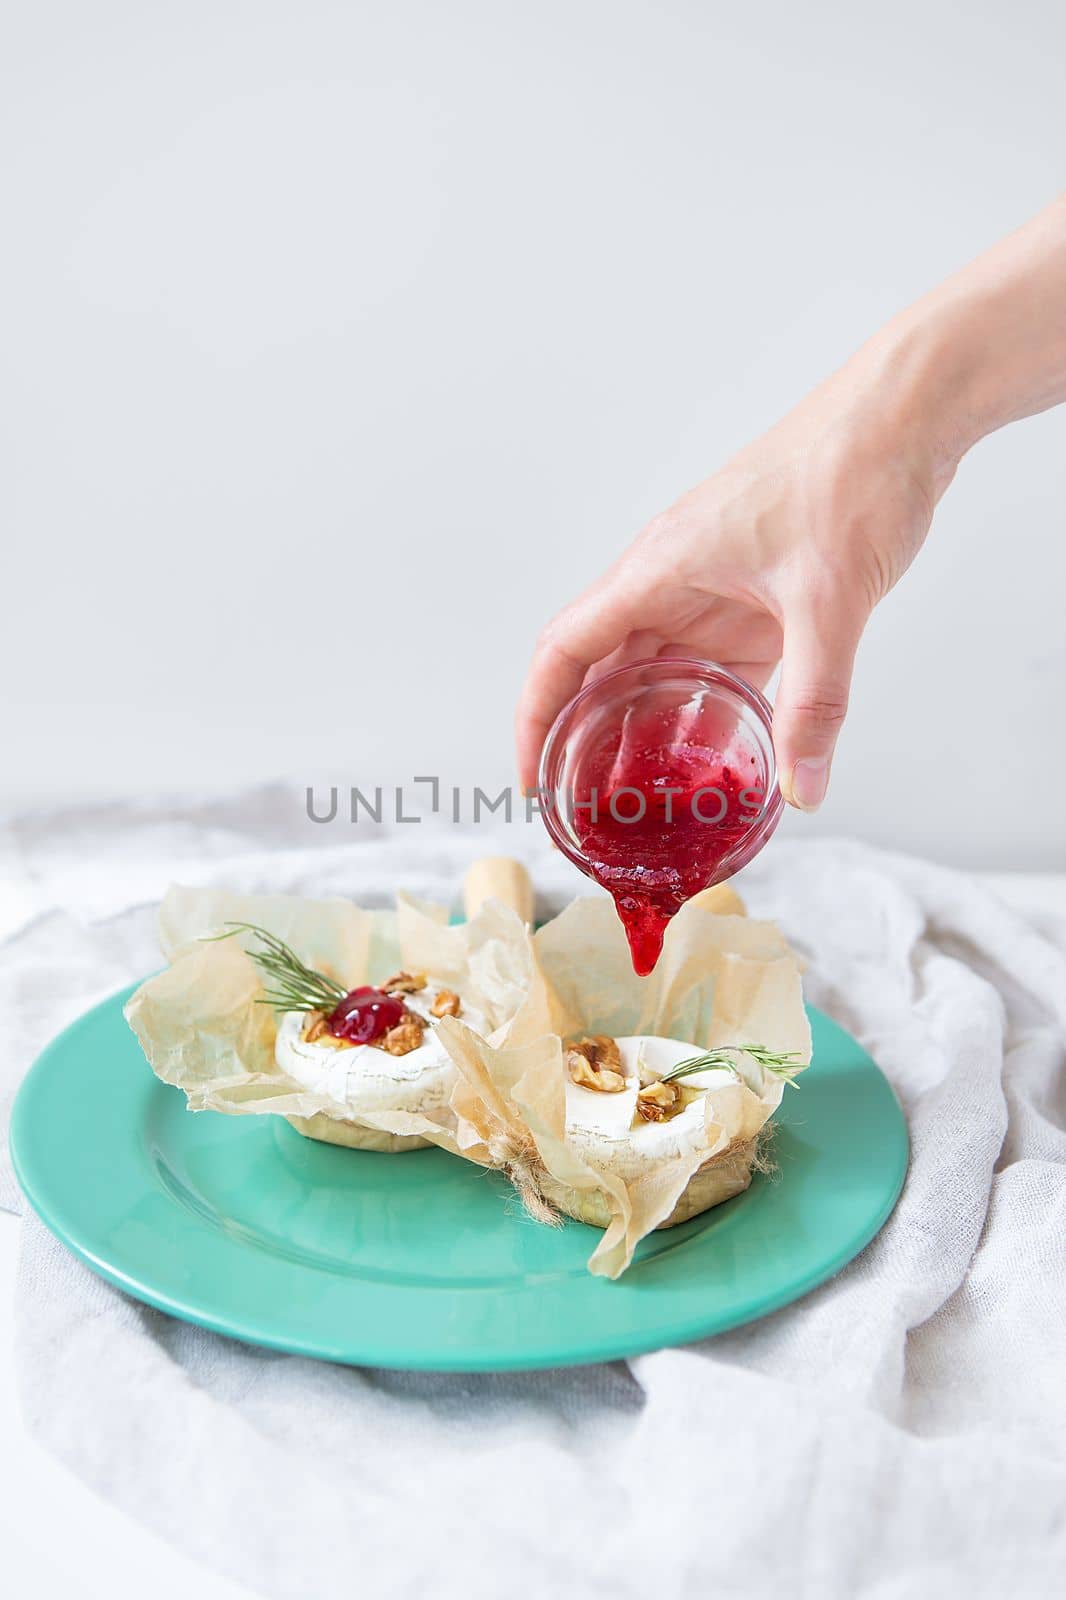 Baked camembert with walnuts, honey and rosemary wrapped in parchment lies on a green plate, a girl pours cranberry jam into the cheese, delicious and healthy food. by sfinks